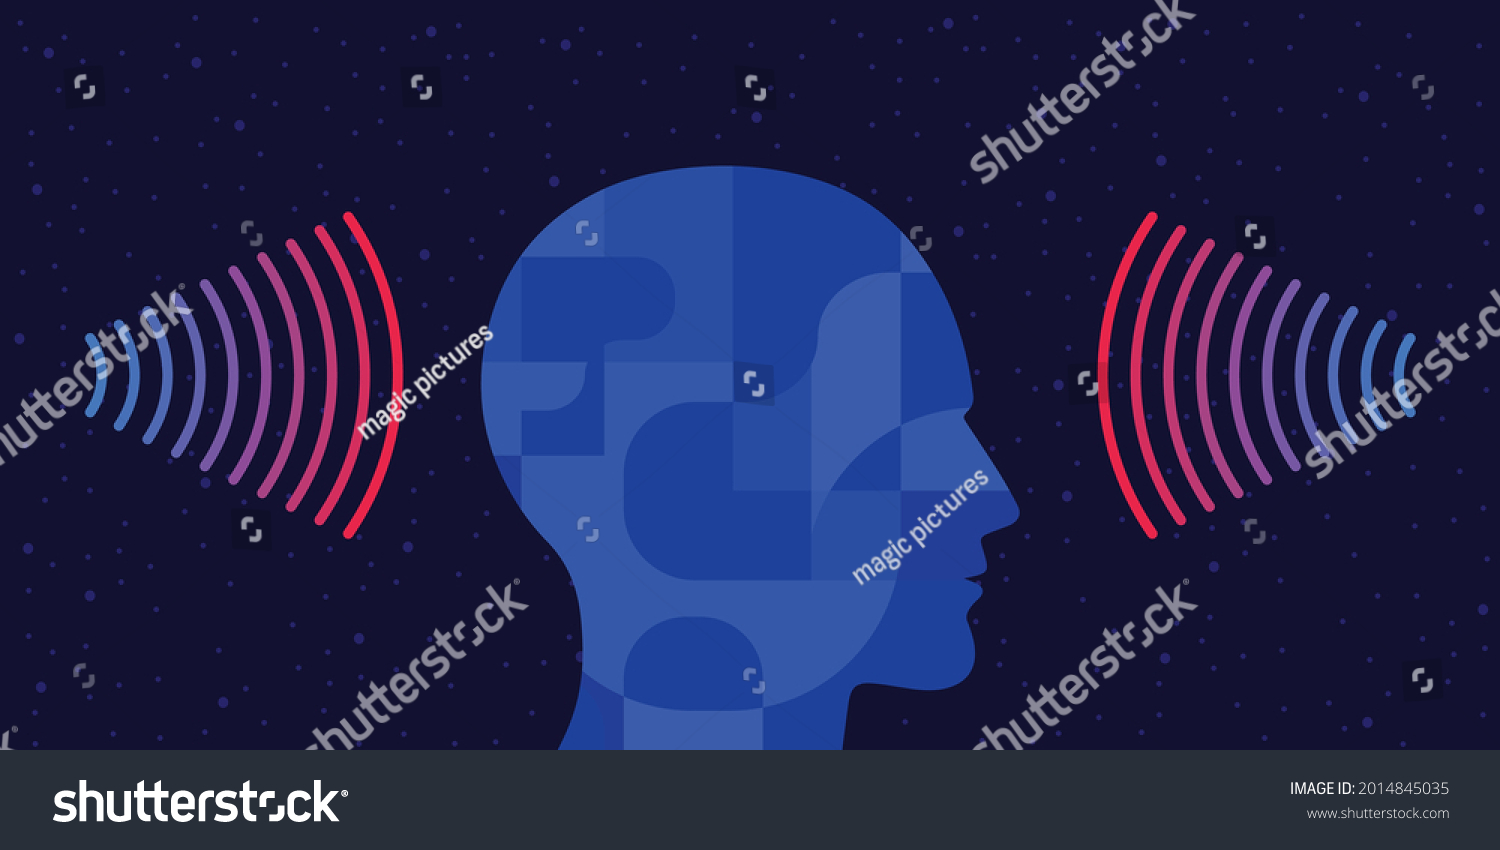 SVG of vector illustration of human head and sound waves for calming down rhythms and meditation svg